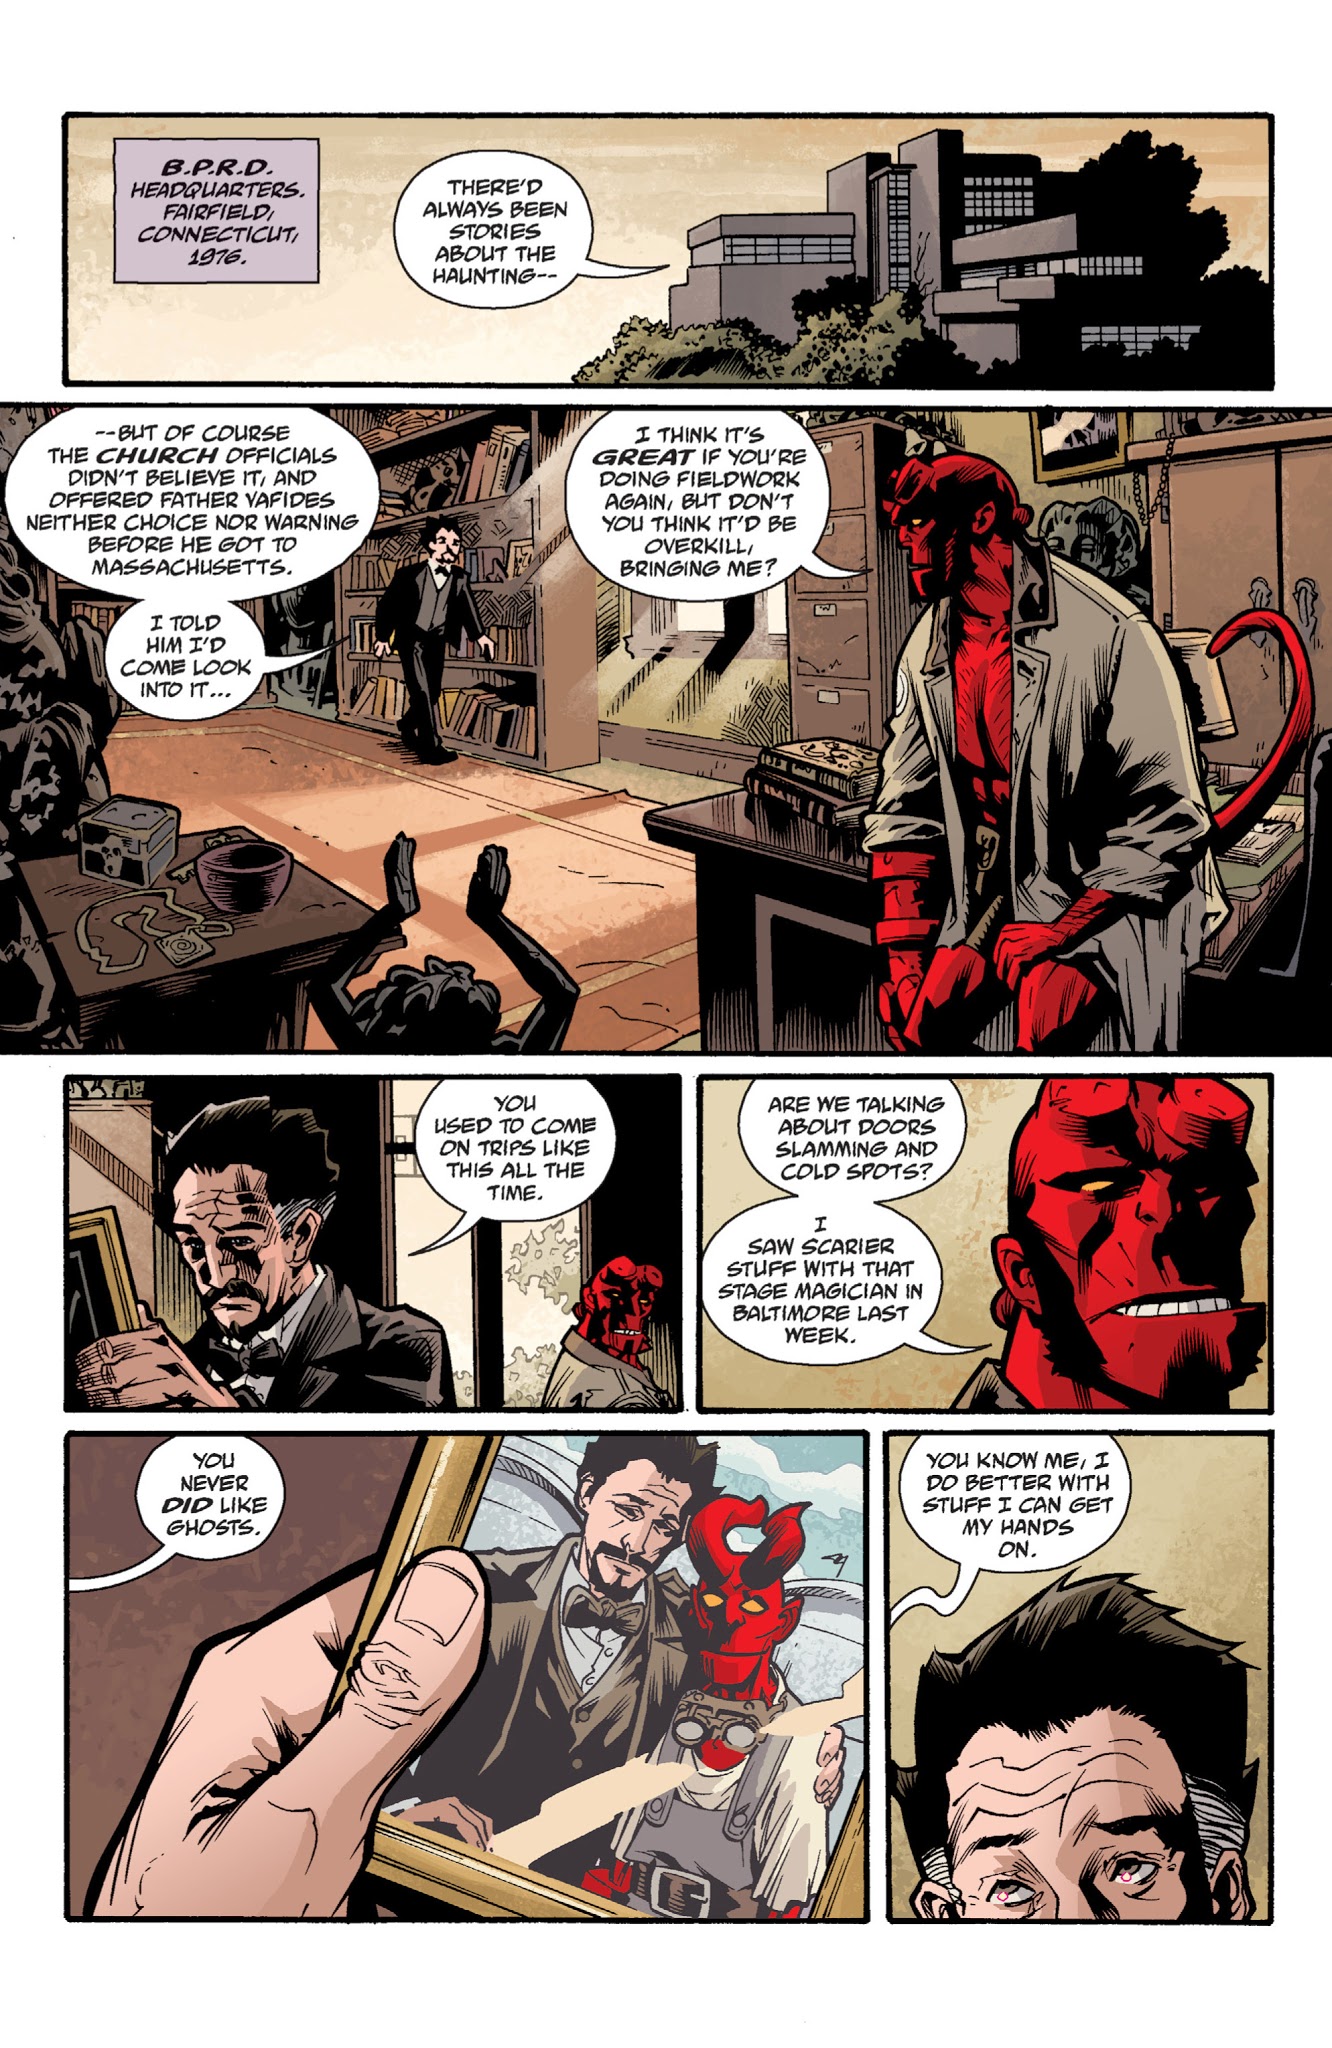 Read online B.P.R.D.: Being Human comic -  Issue # TPB - 10